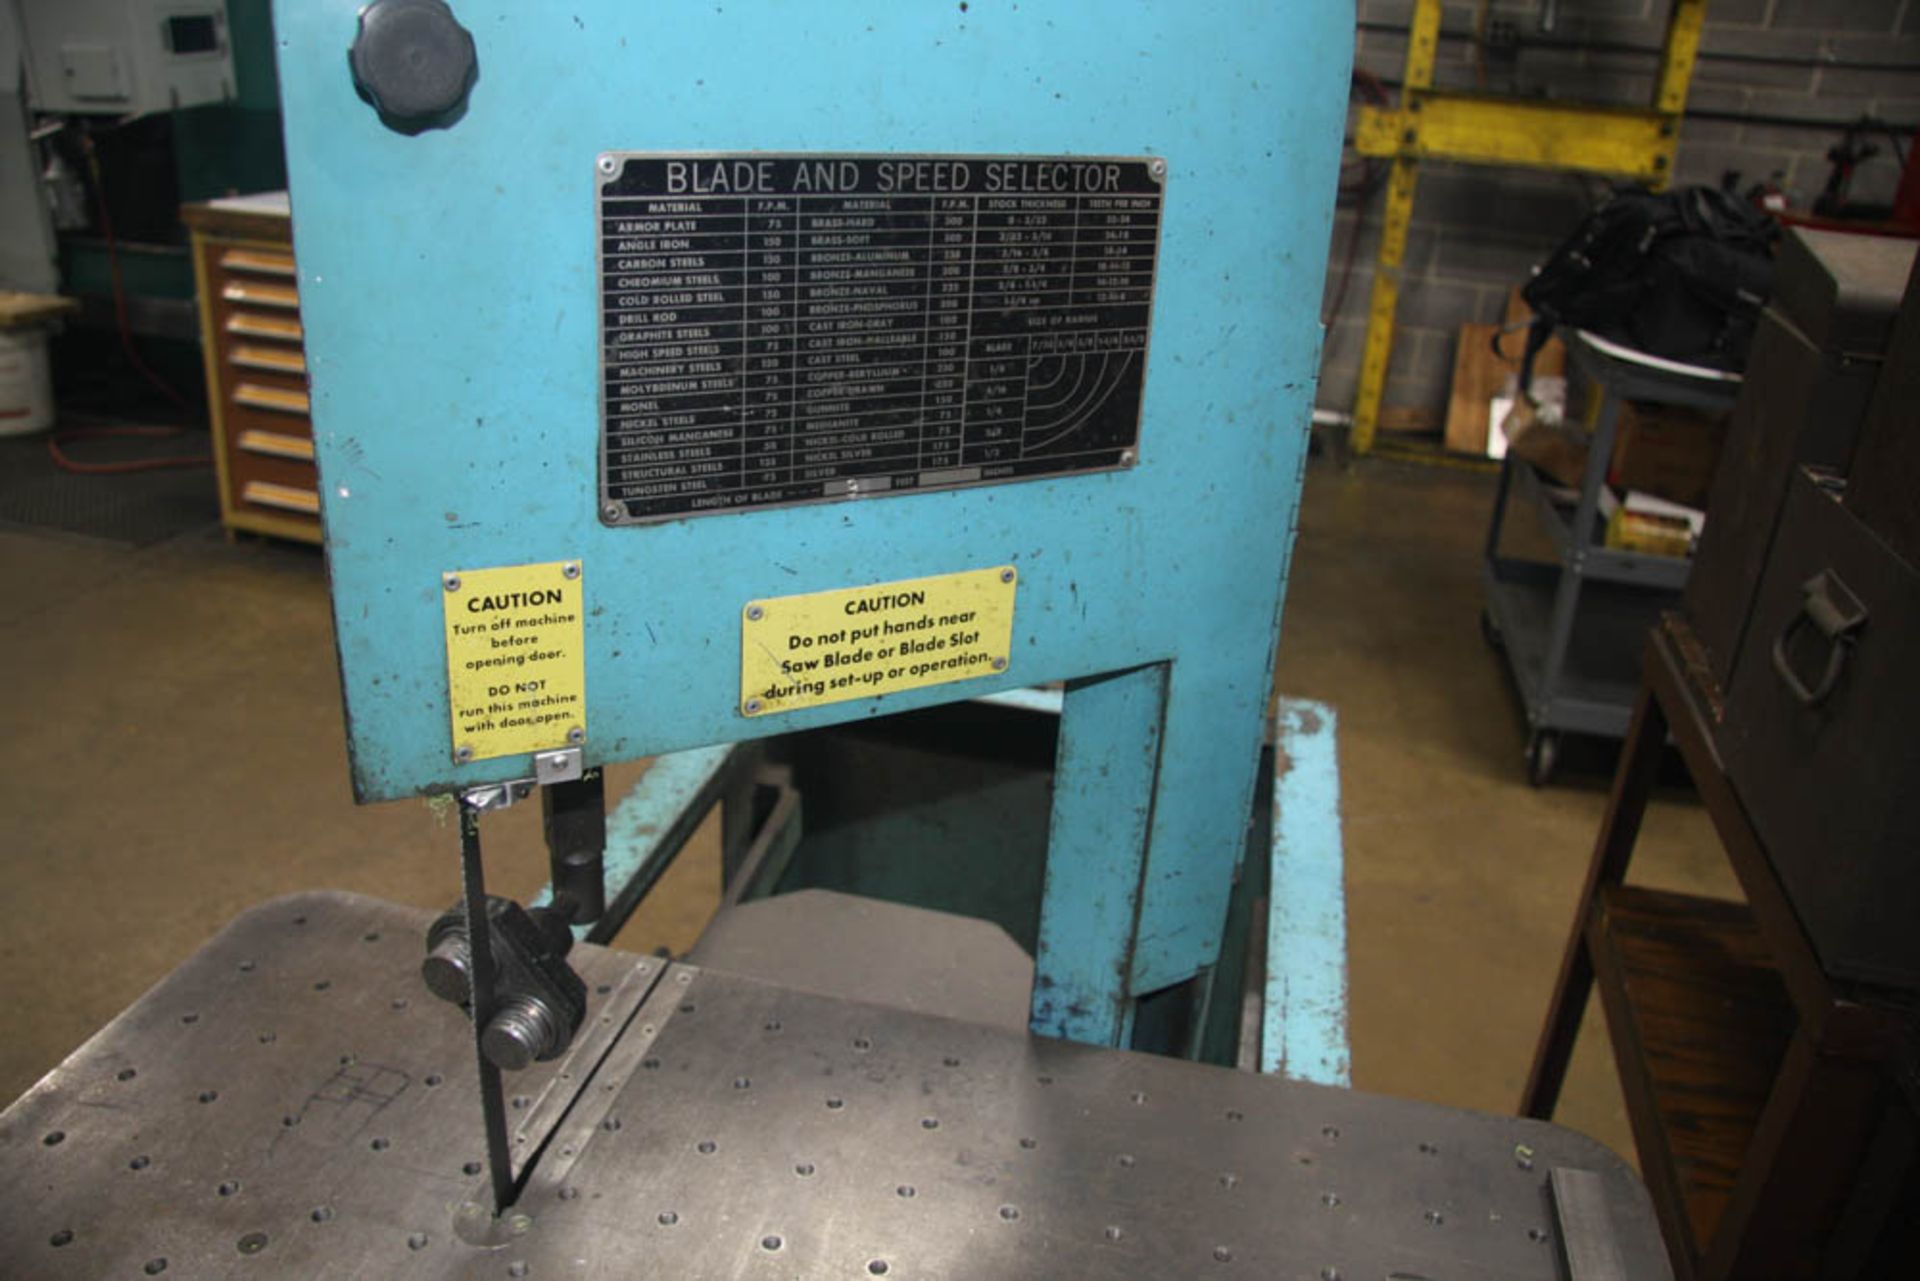 12" ROLL-IN VERTICAL BANDSAW, PORTABLE - Image 2 of 6